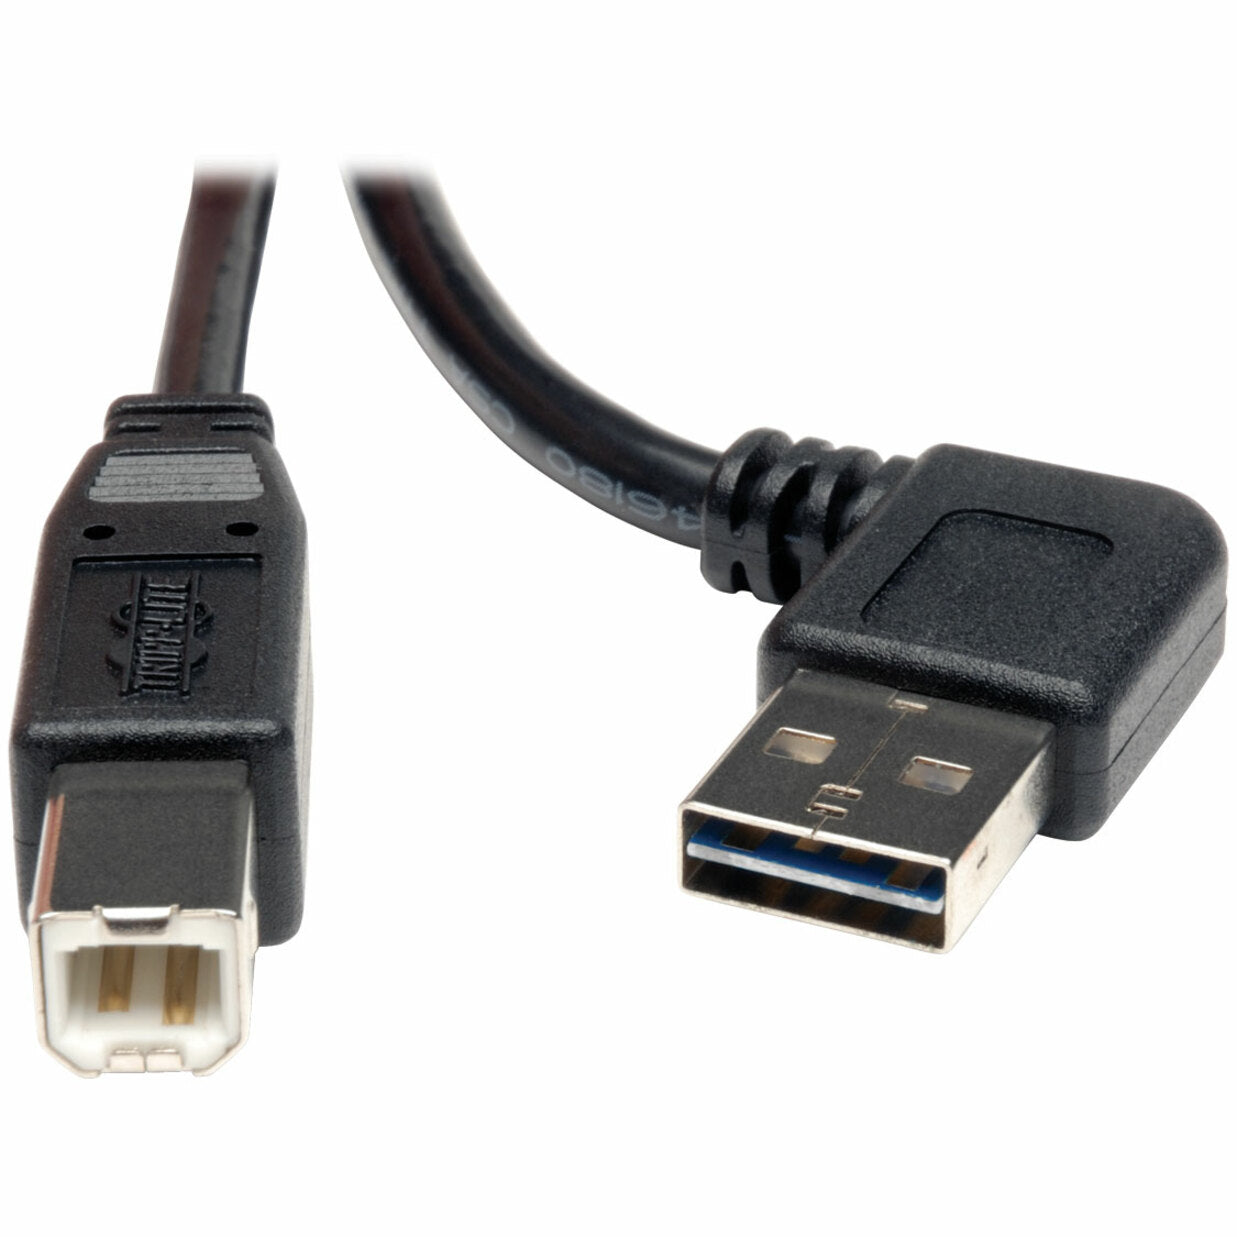 Tripp Lite UR022-006-RA Universal Reversible USB 2.0 Right Angle A-Male to B-Male Device Cable, 6ft